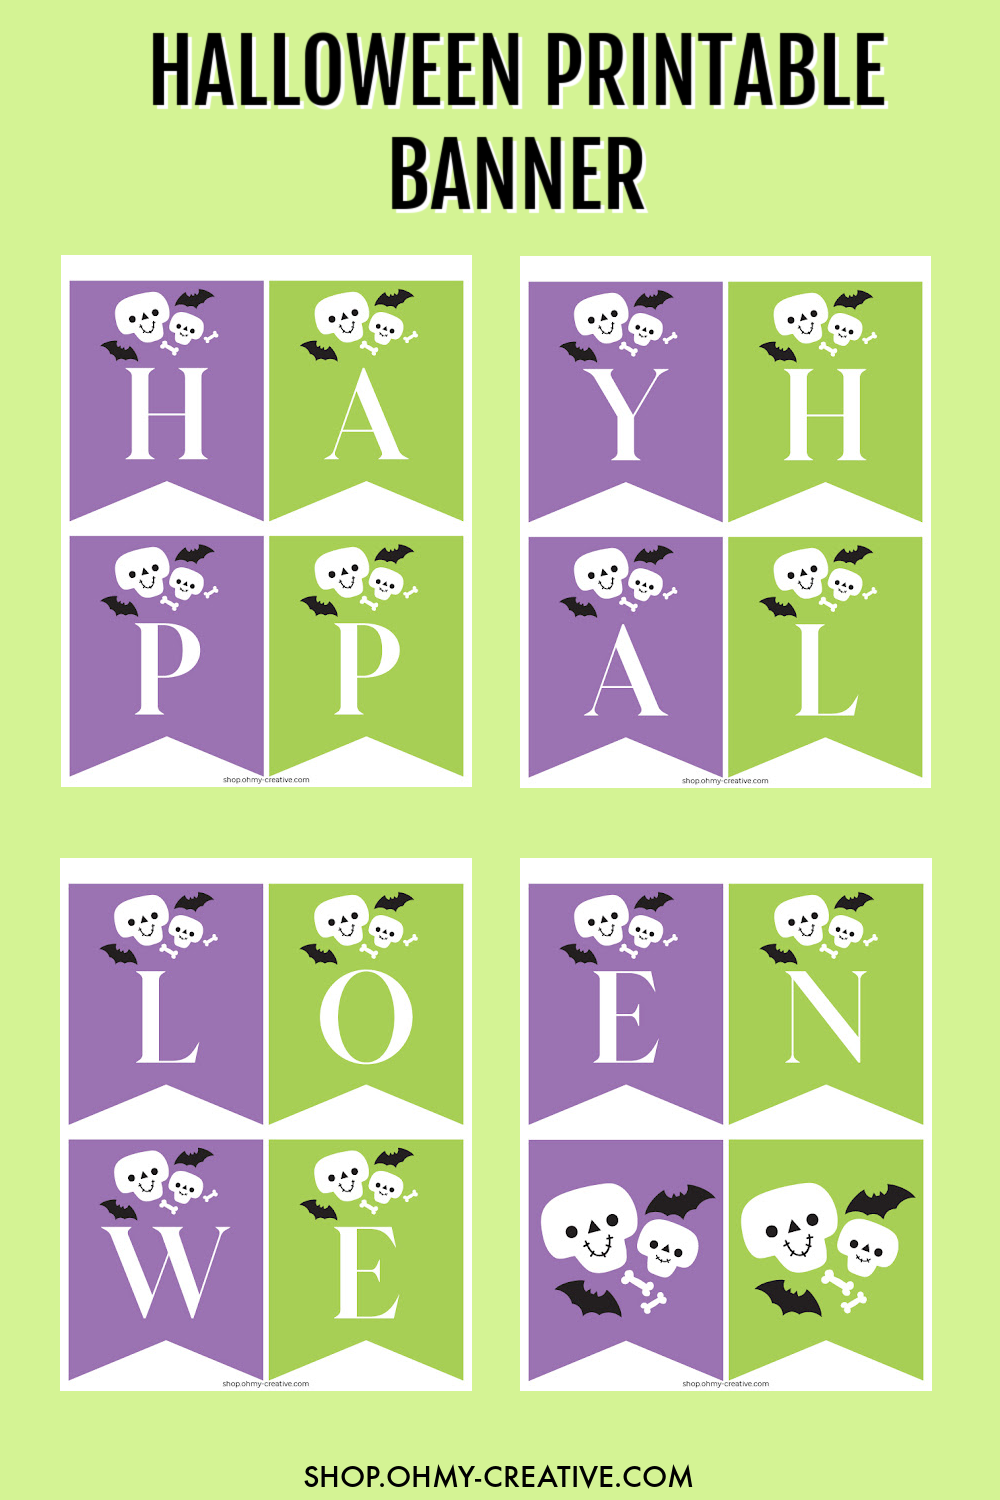 Halloween printable panner pages in green and purple with cute skulls and bats.